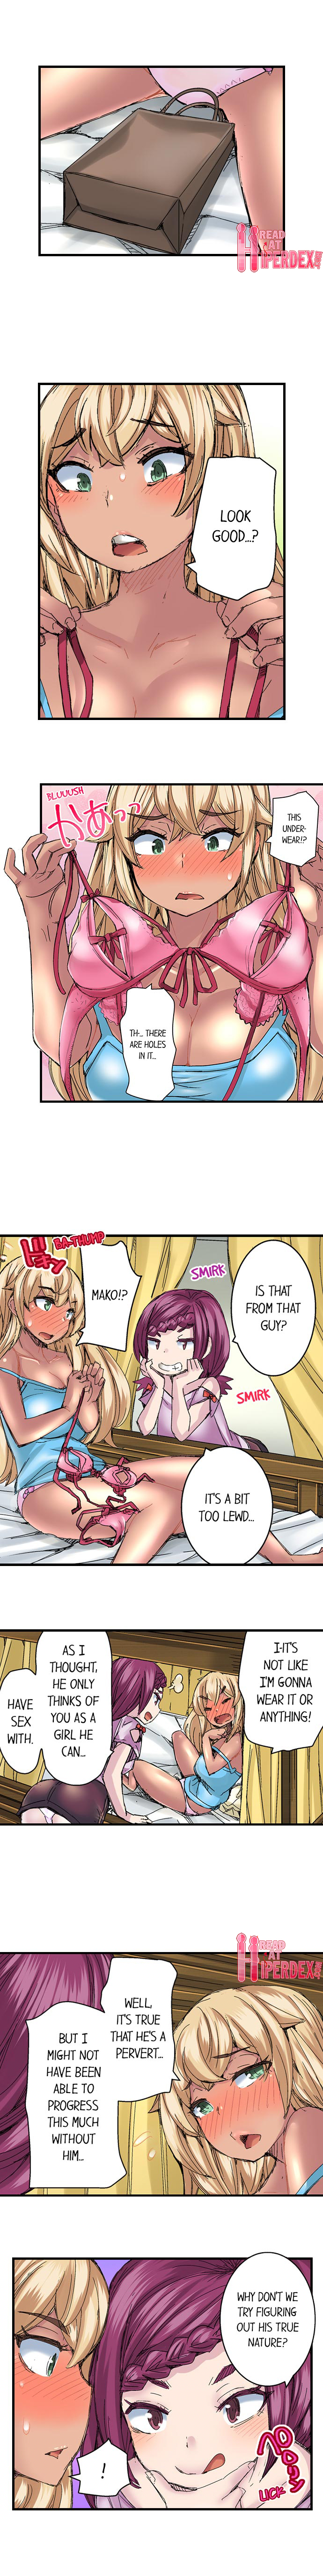 Taking a Hot Tanned Chick’s Virginity - Chapter 28 Page 7